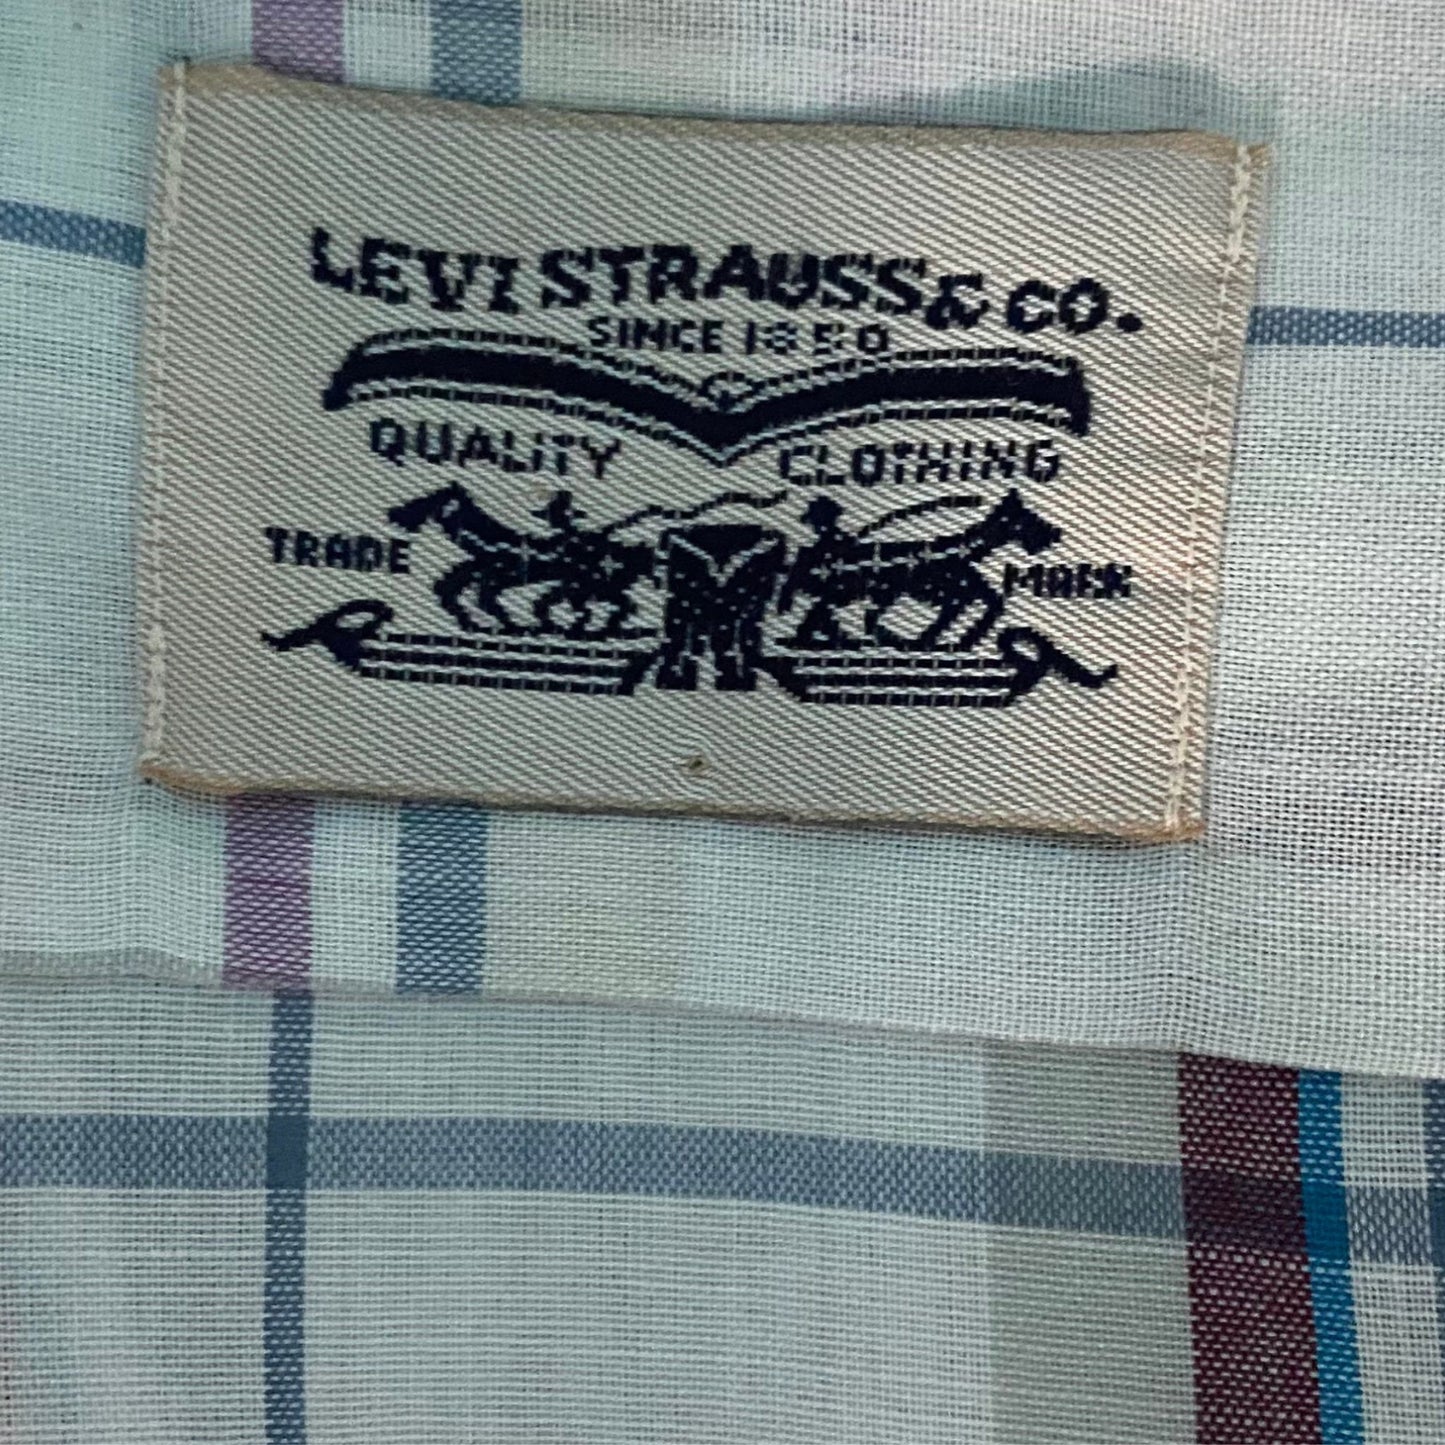 Vintage Levi's White Striped Cotton Shirt with Chest Pockets - Classic Style and Timeless Appeal . Approx UK size large (mens) 14-18  (women’s)